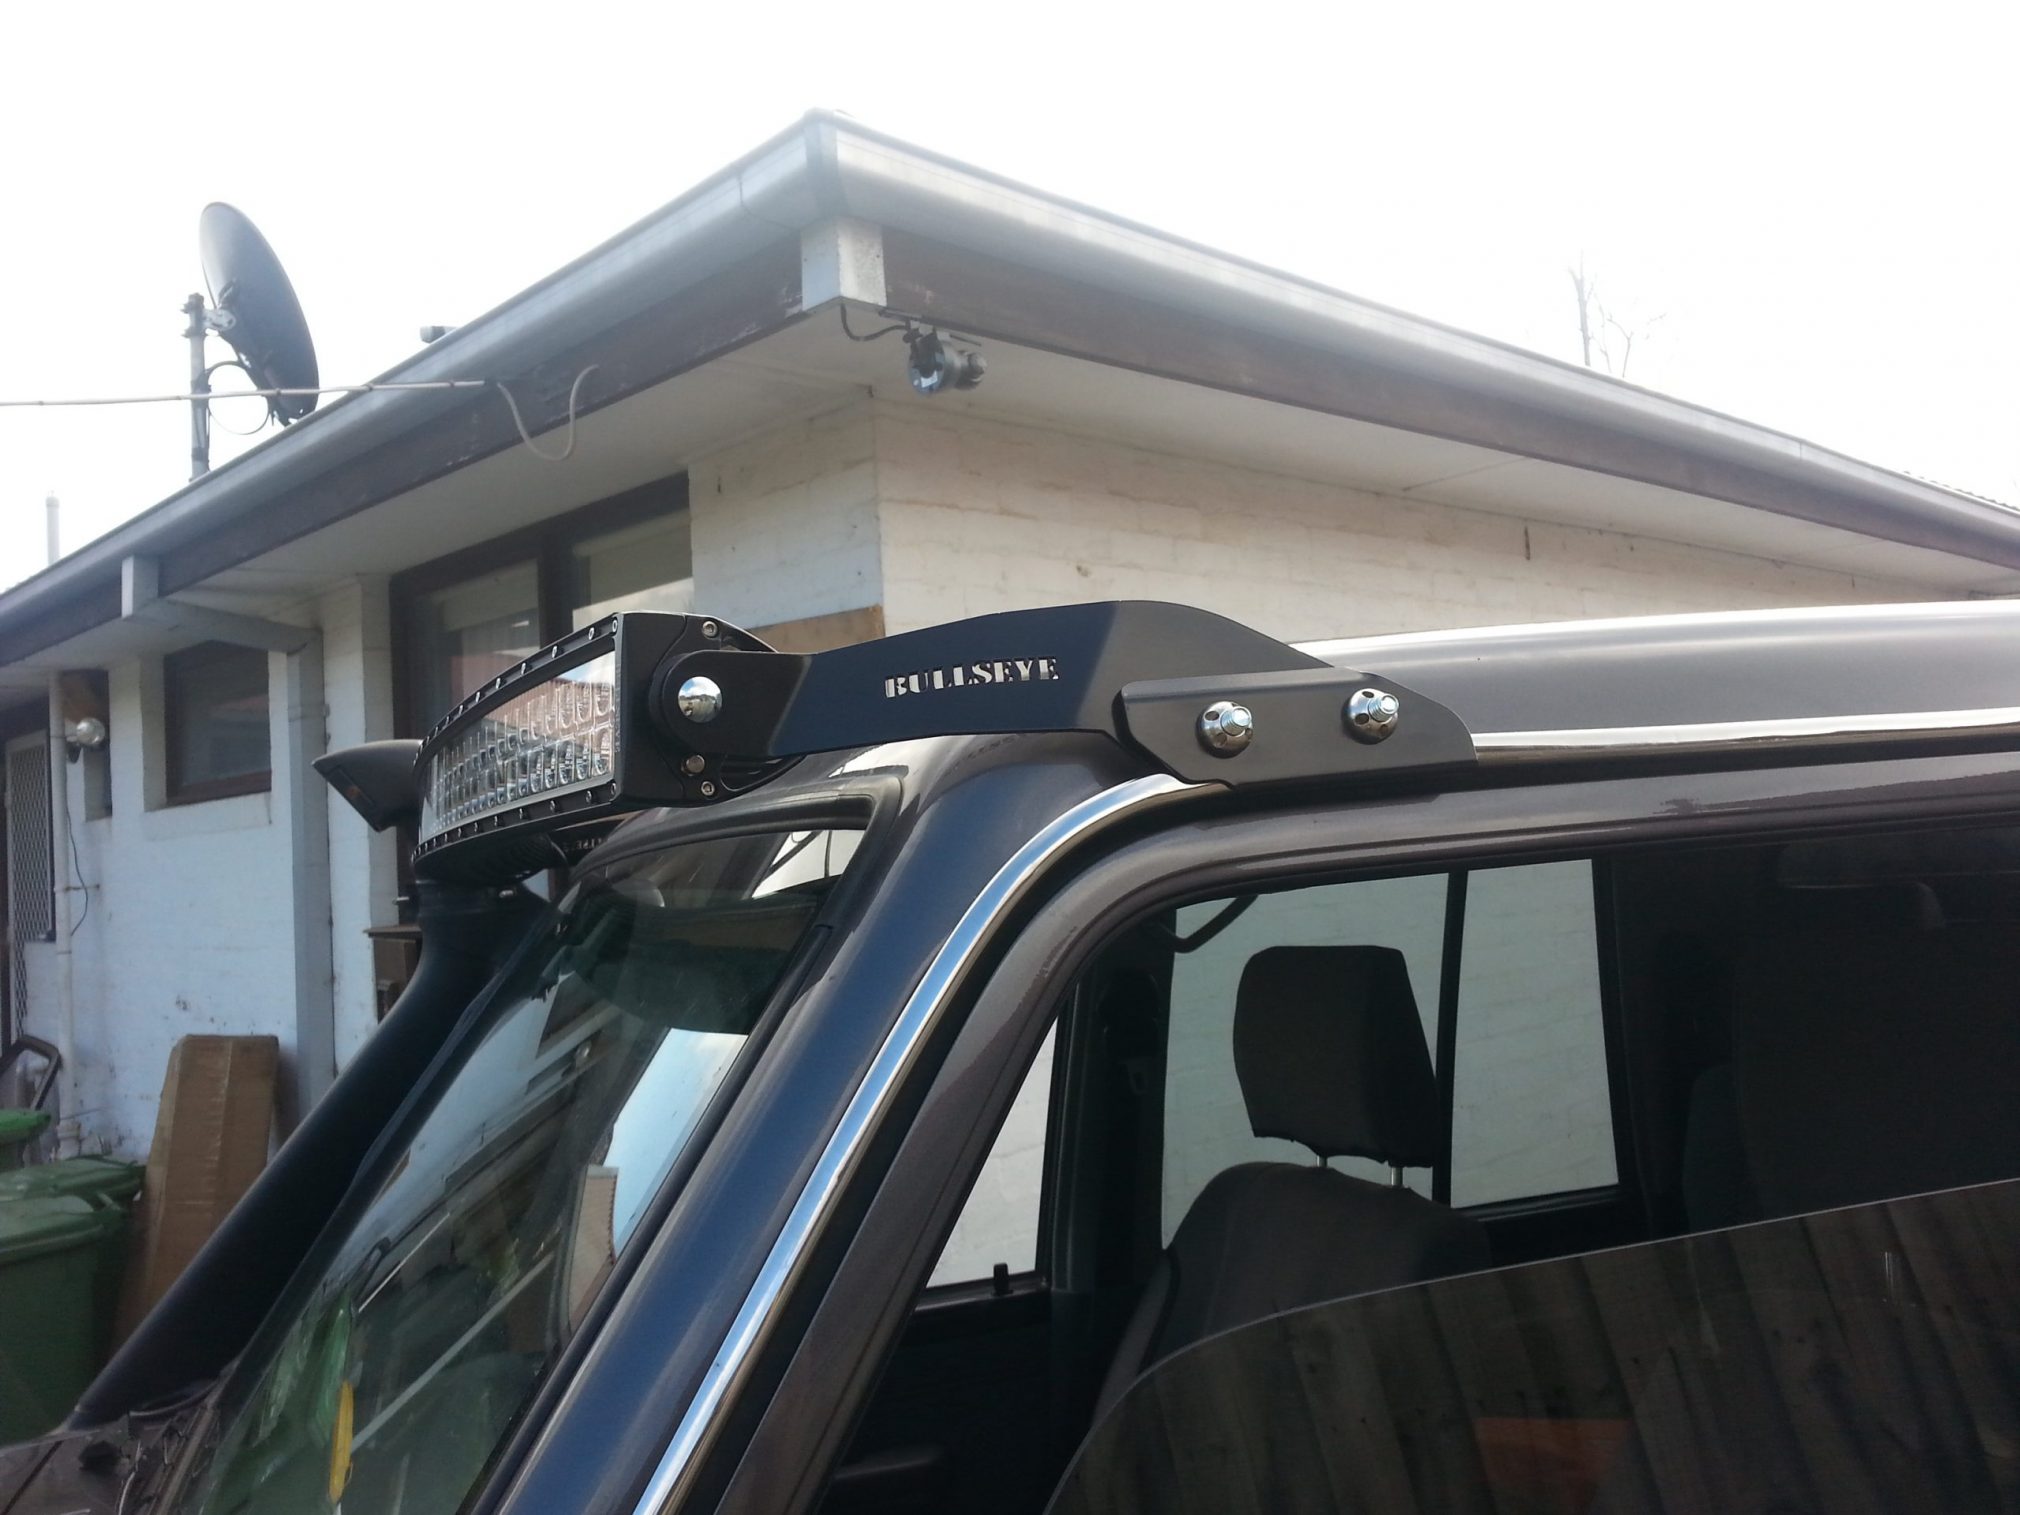 Toyota LandCruiser 79/76 Series 50 inch Curved Light Bar Windscreen Mount Brackets Black or Stainless Bullseye Products 4x4 Lilydale Melbourne Australia